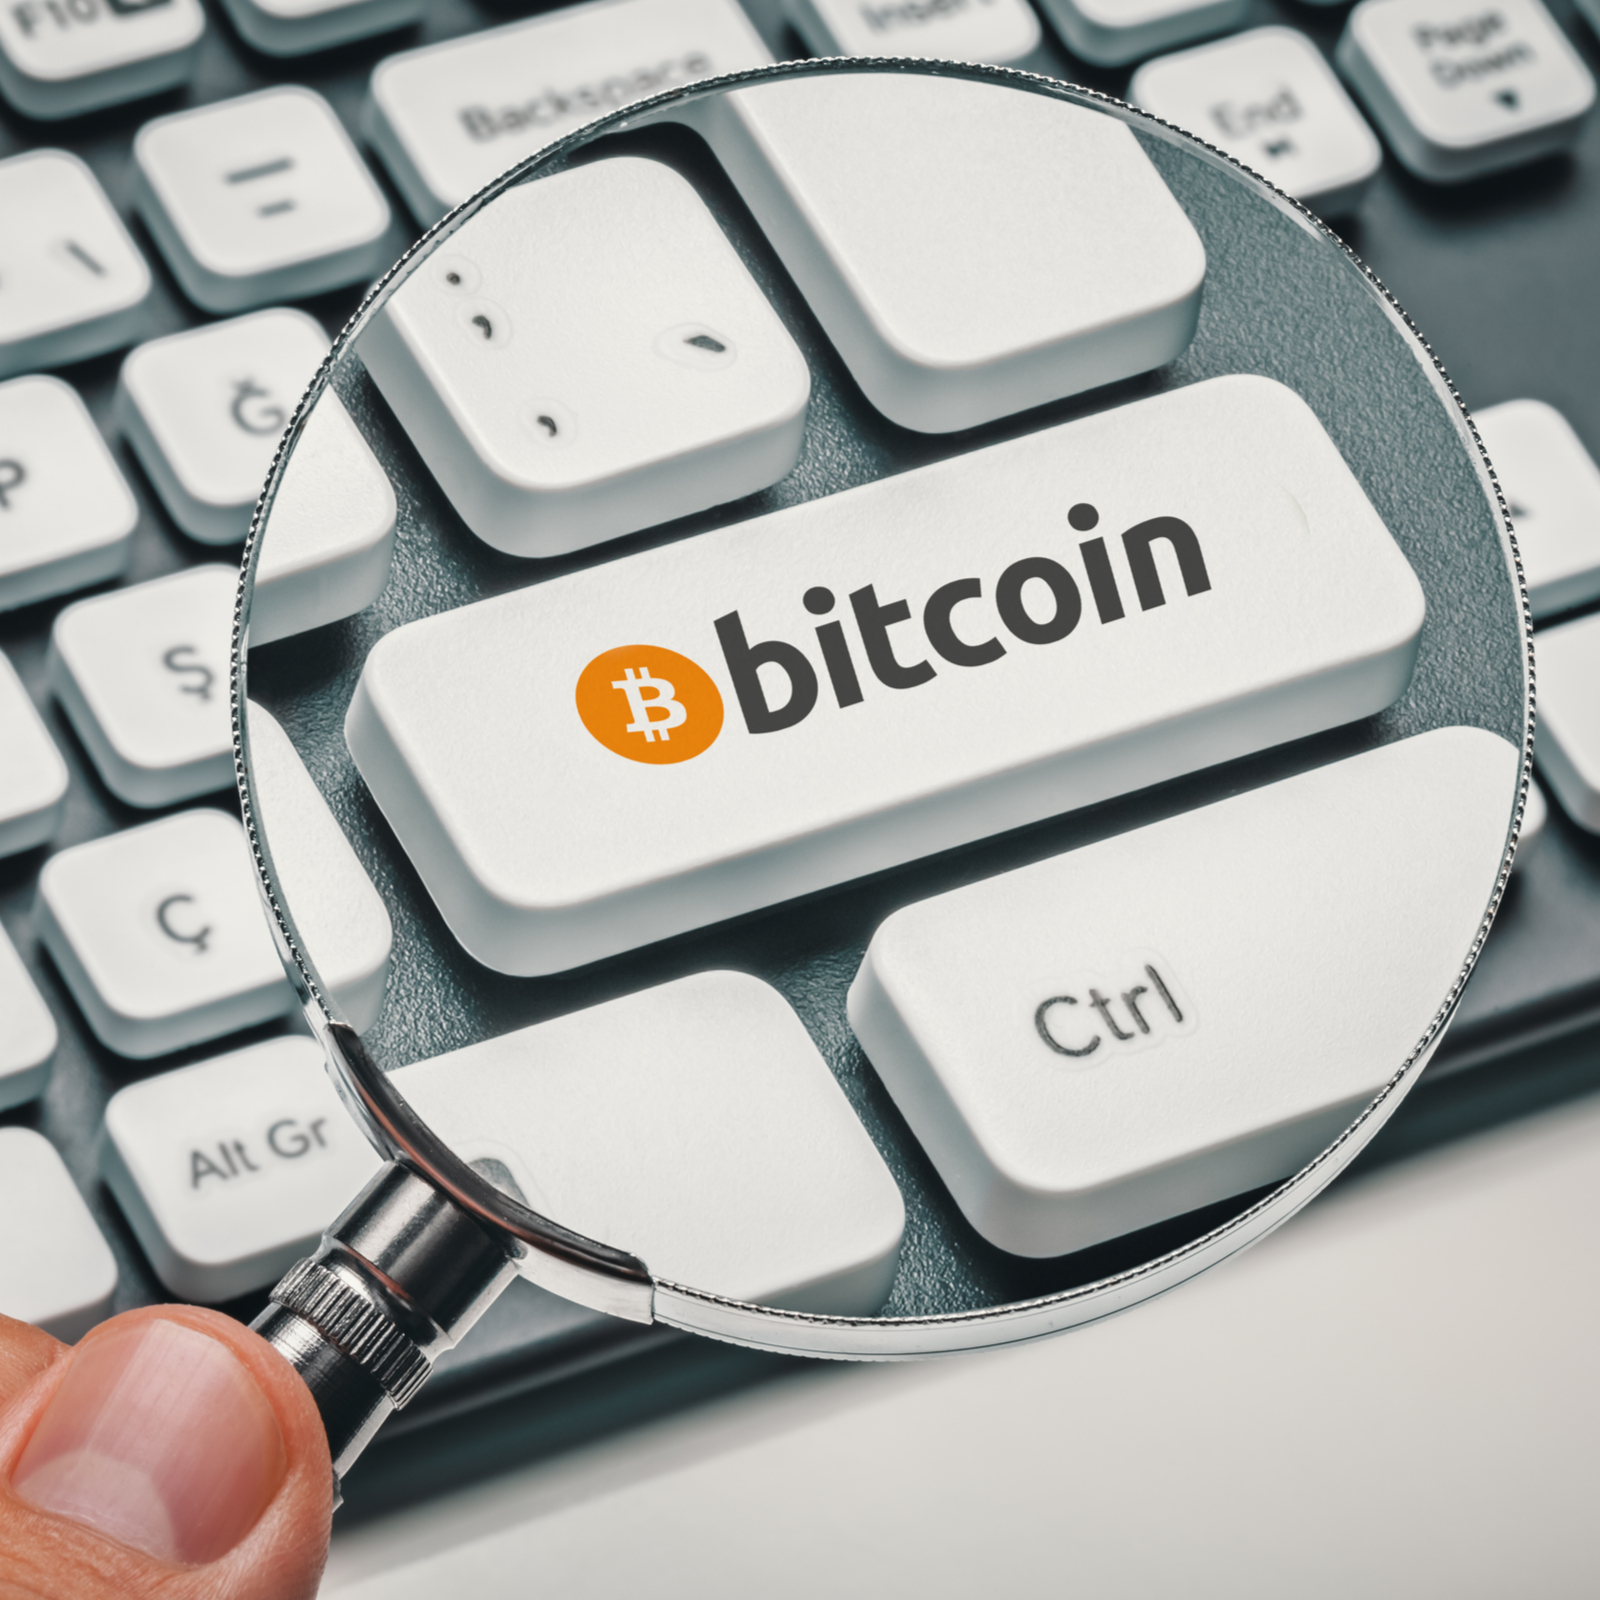 South African Google Searches for Bitcoin Spike Amid Economic Uncertainty